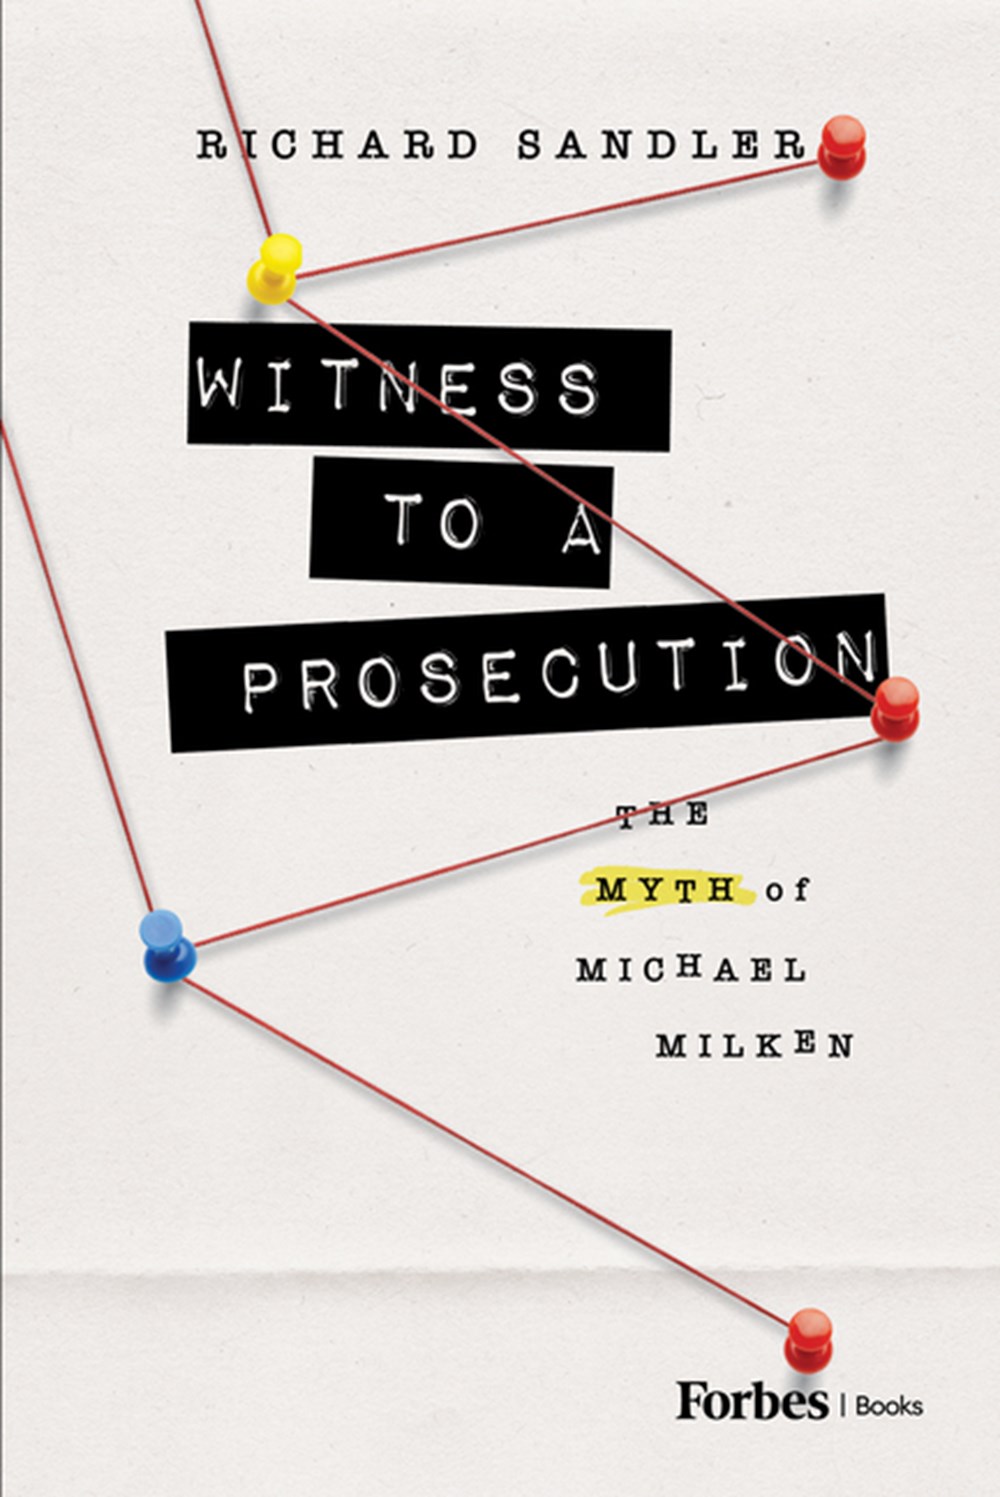 Witness to a Prosecution: The Myth of Michael Milken